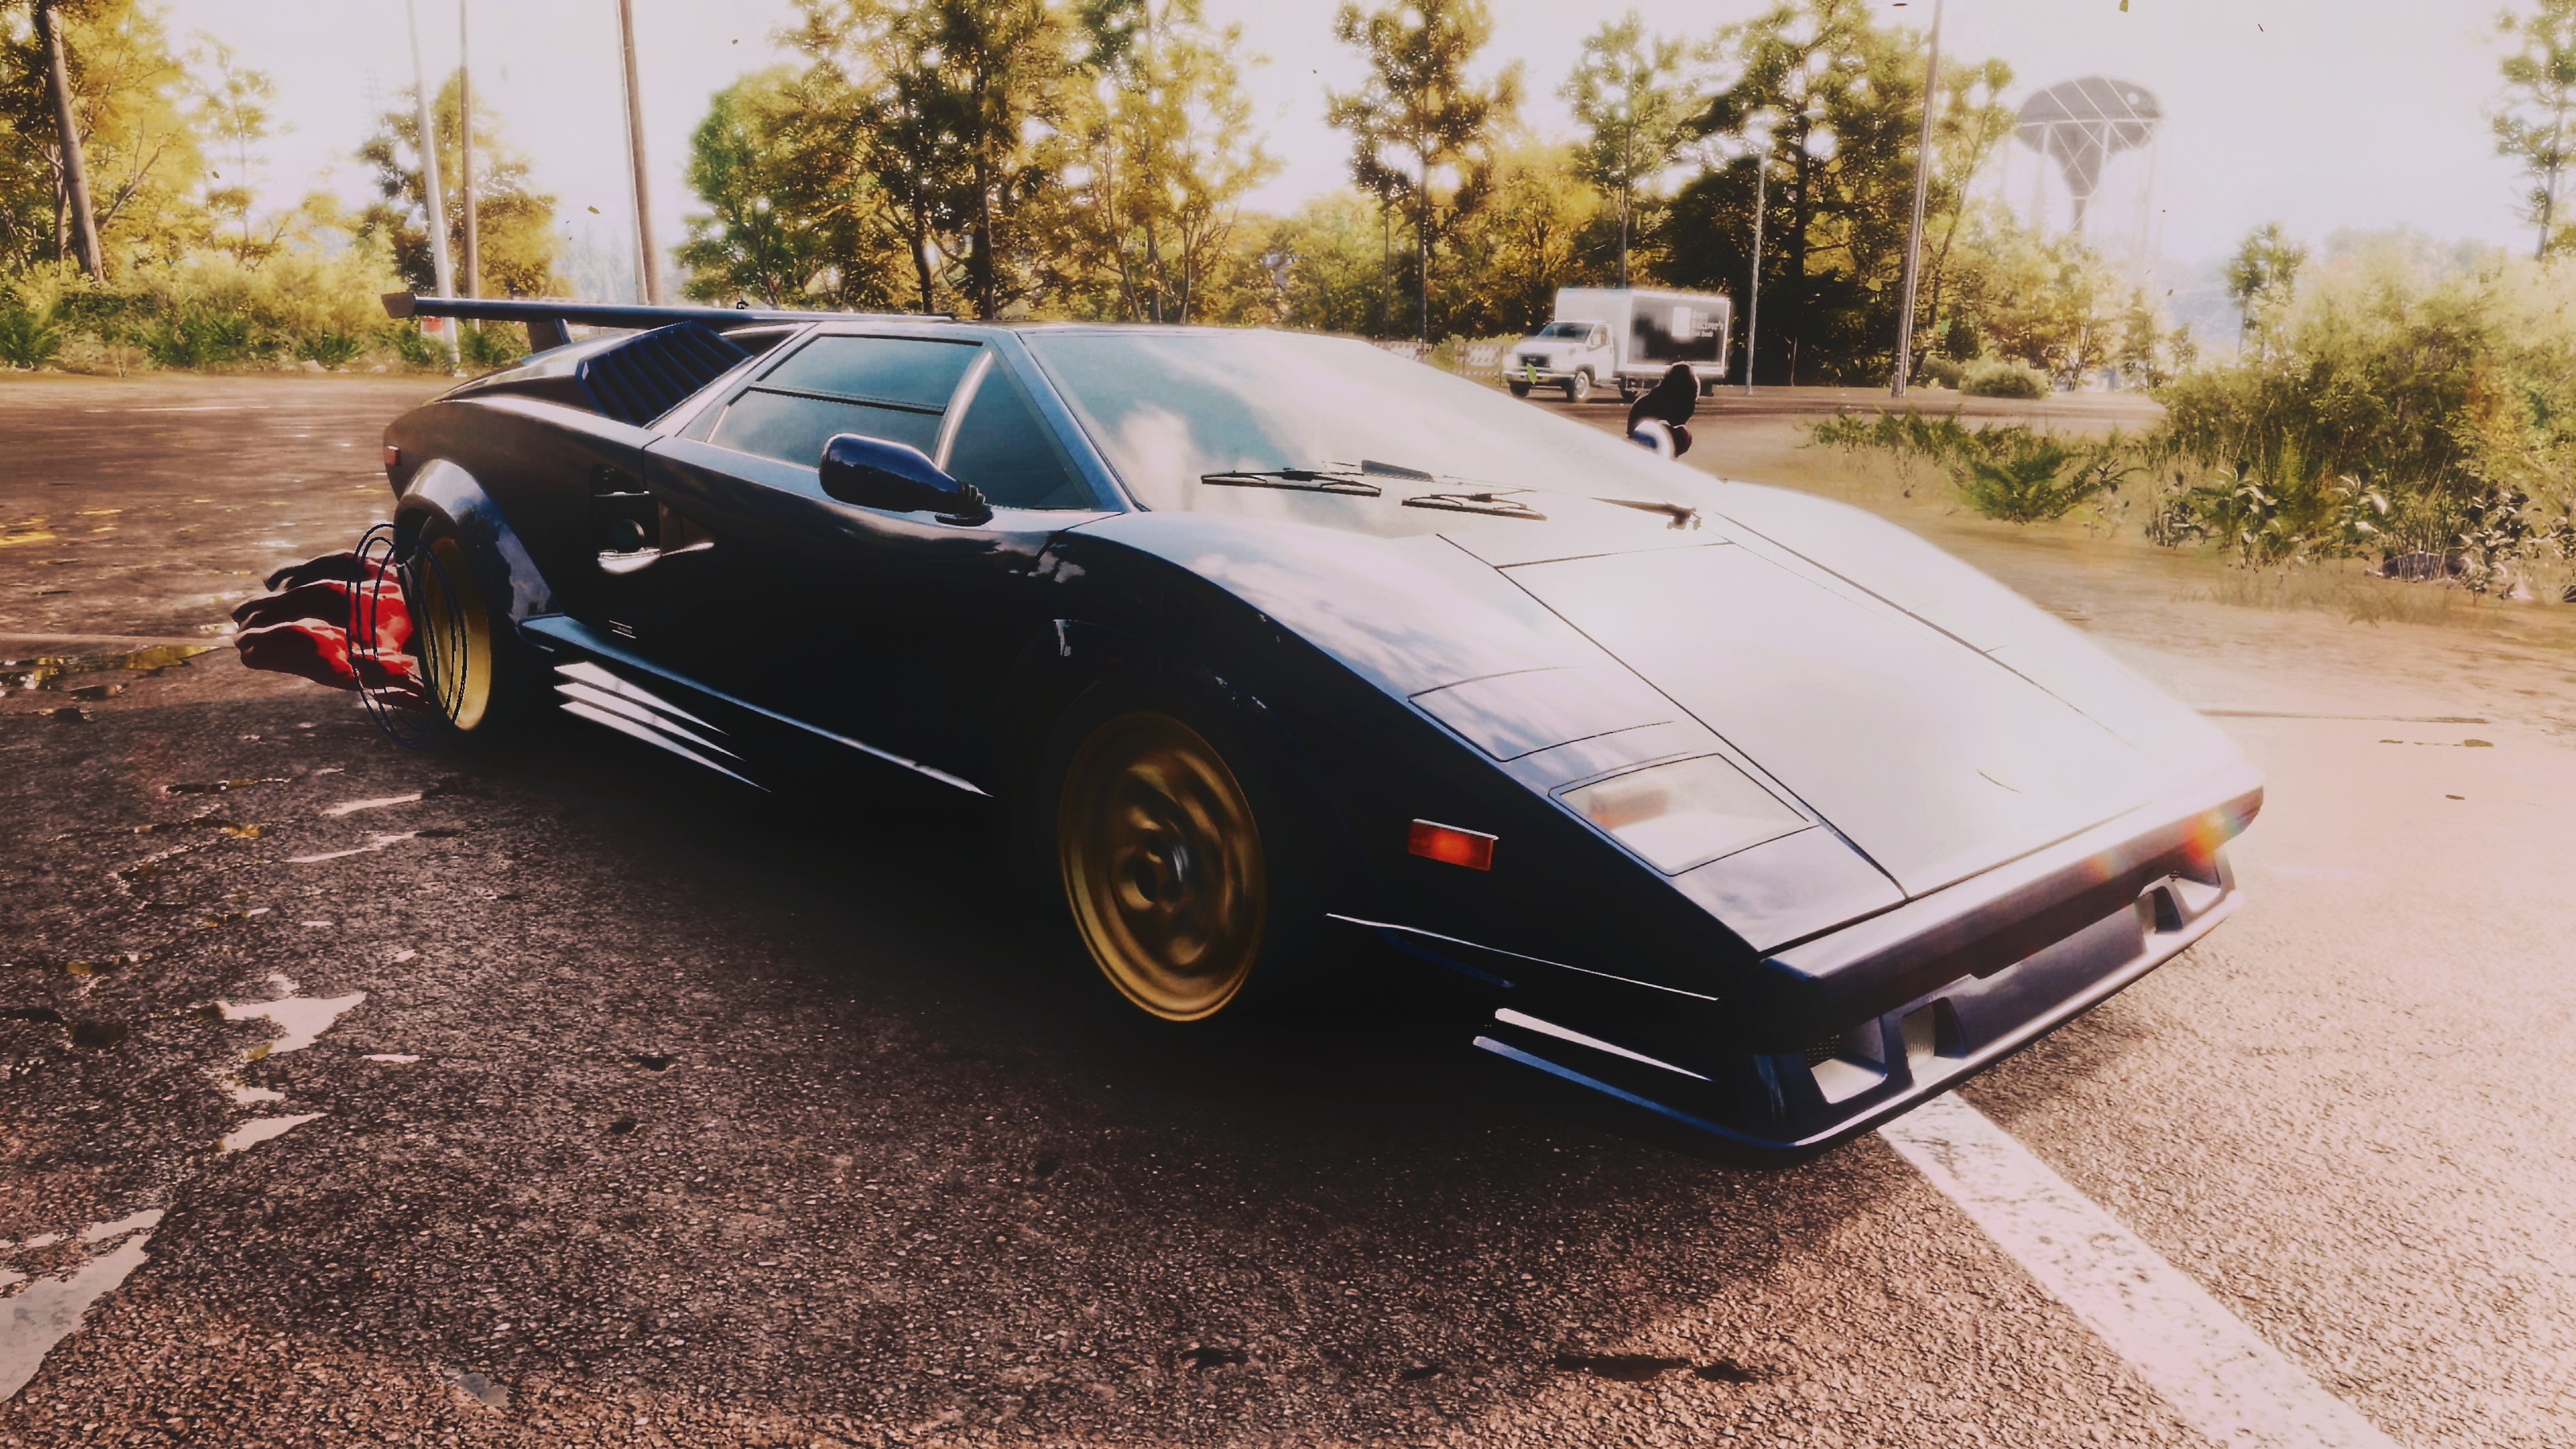 General 3840x2160 Need for speed Unbound Need for Speed edit CGI car 4K gaming video game characters drift effects video games EA Games Criterion Games Lamborghini Countach Lamborghini